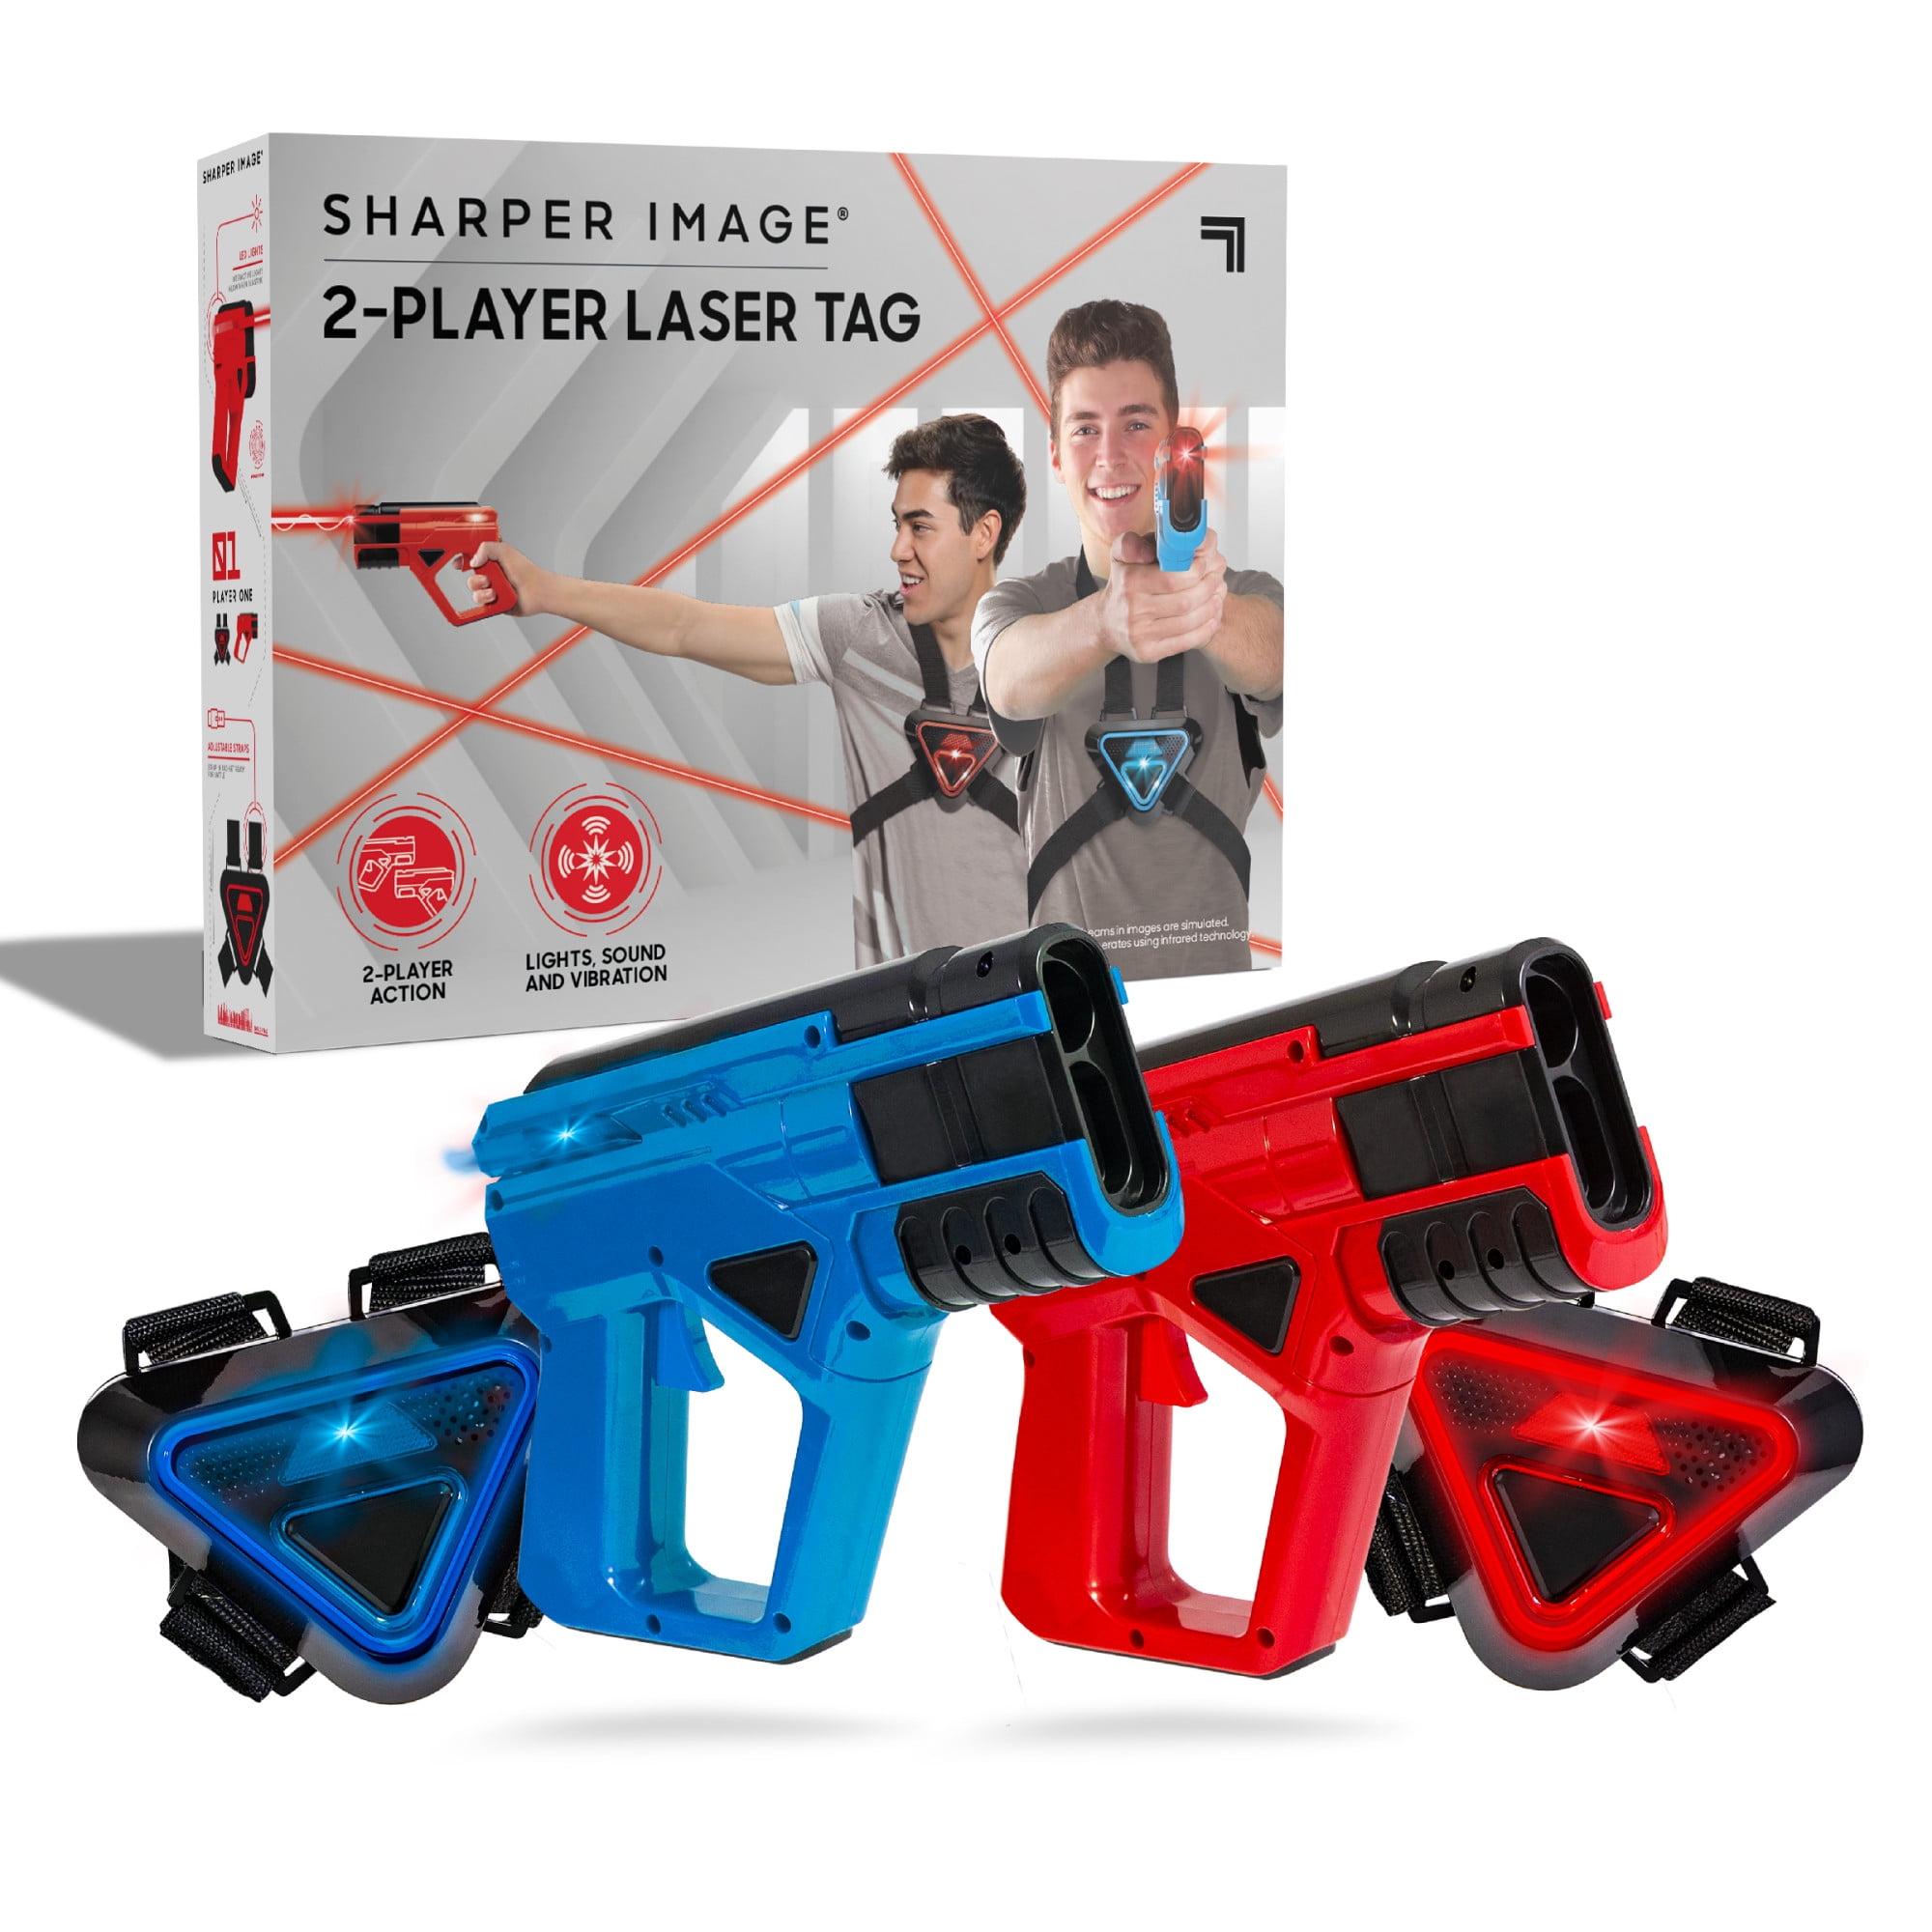 SHARPER IMAGE Two-Player Toy Laser Tag Gun Blaster and Vest Armor Set for Kids, Safe for Children and Adults, Indoor and Outdoor Battle Games, Combine Multiple Sets for Multiplayer Free-for-All!